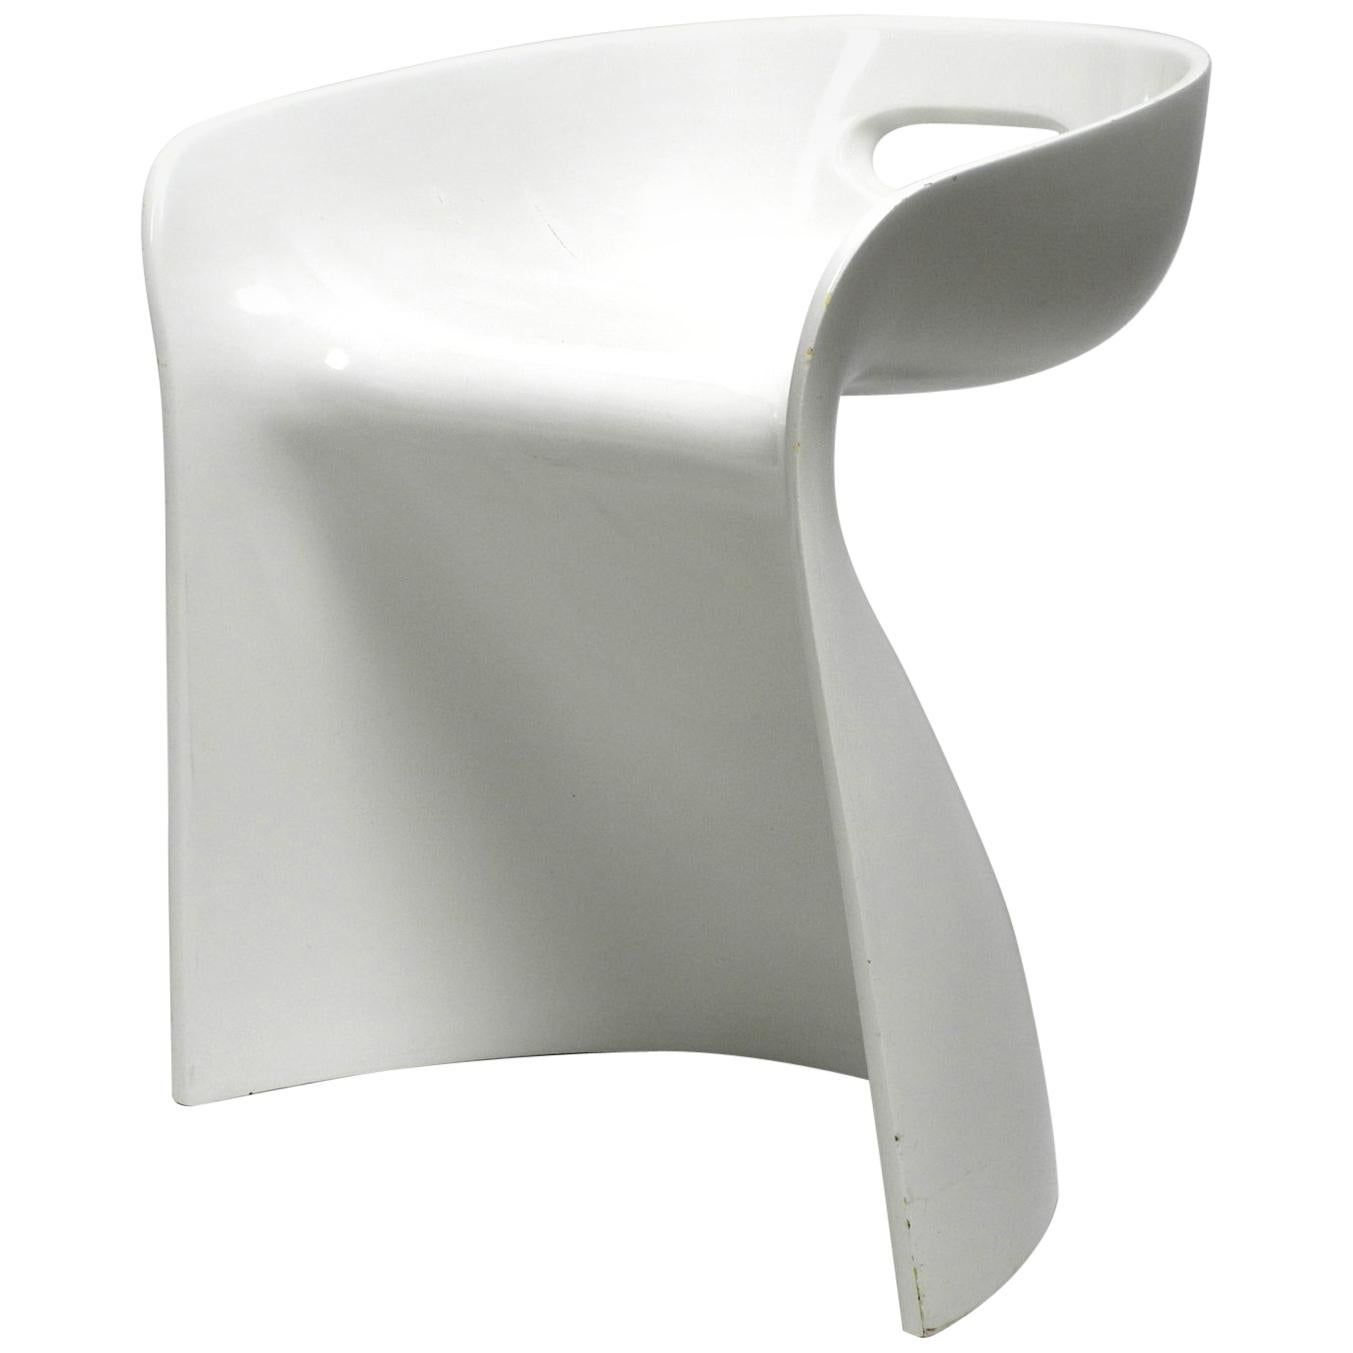 Rare White Stool by Winfried Staeb from the 1970s for Form + Life Collection